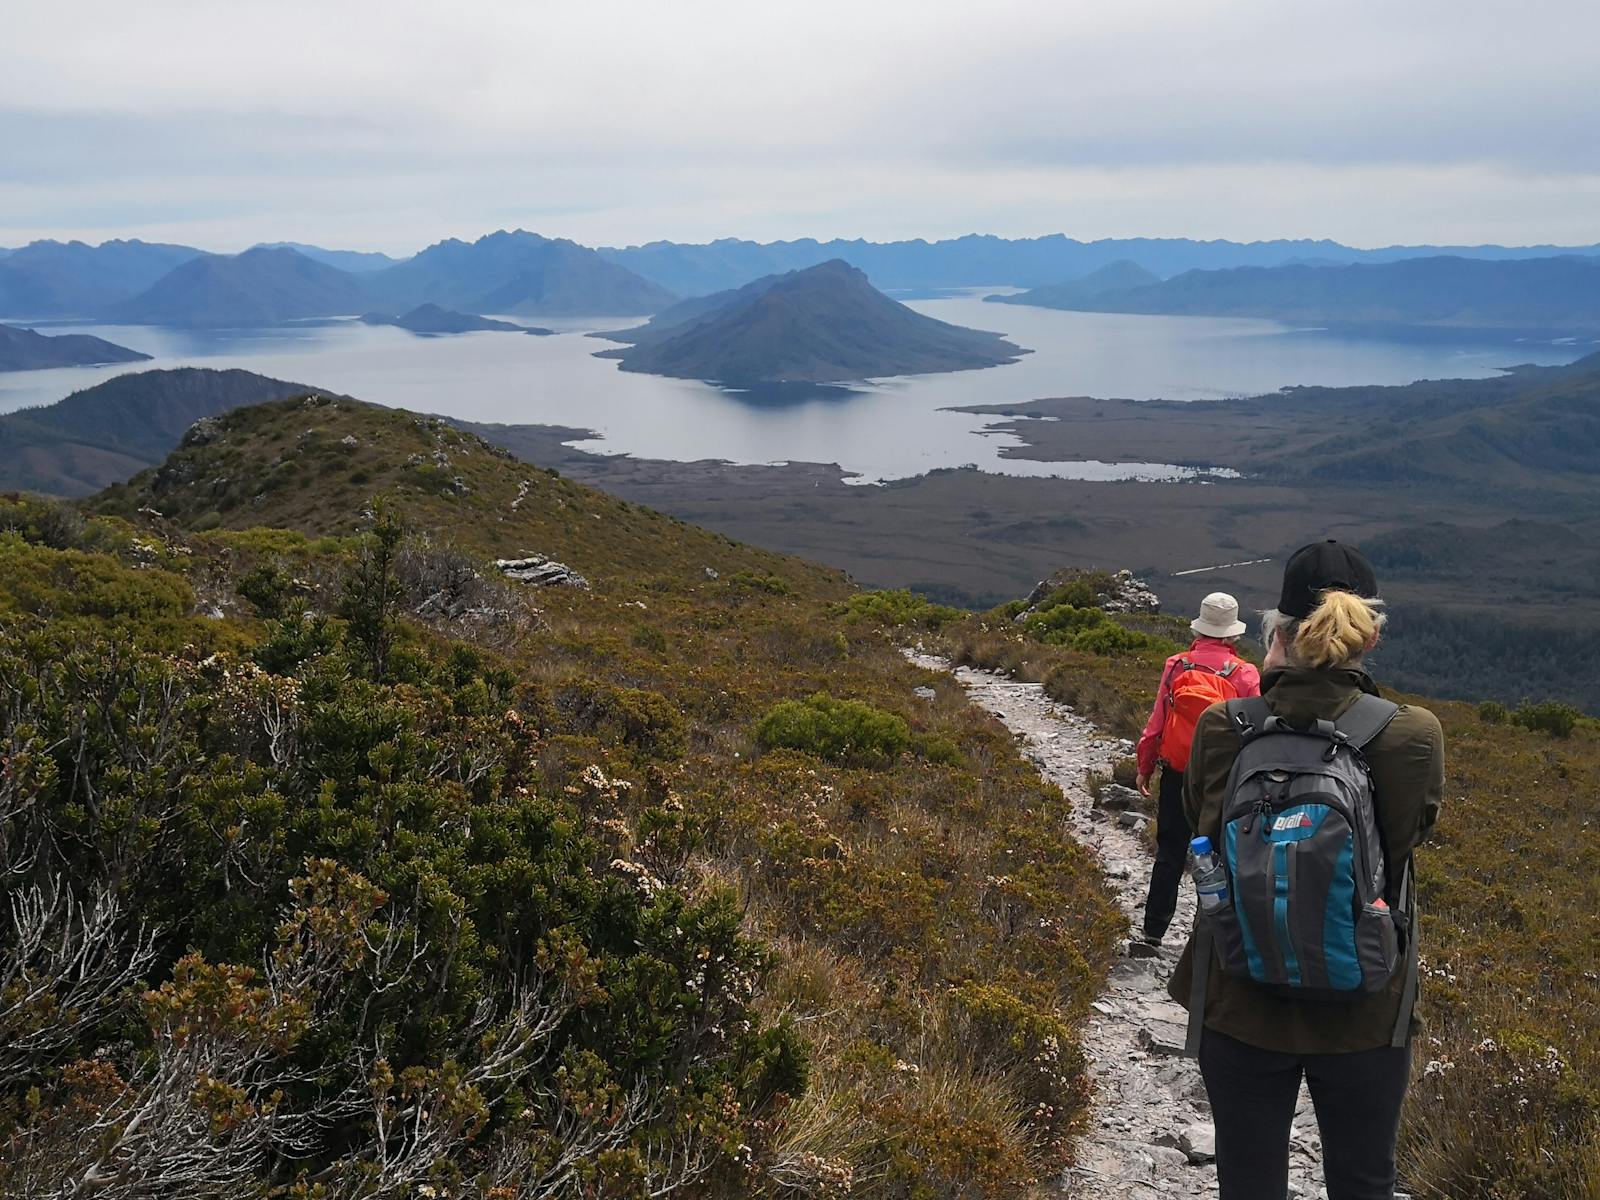 High on life on the Lake Pedder & South West Wilderness Pack-Free Walk by Life's An Adventure